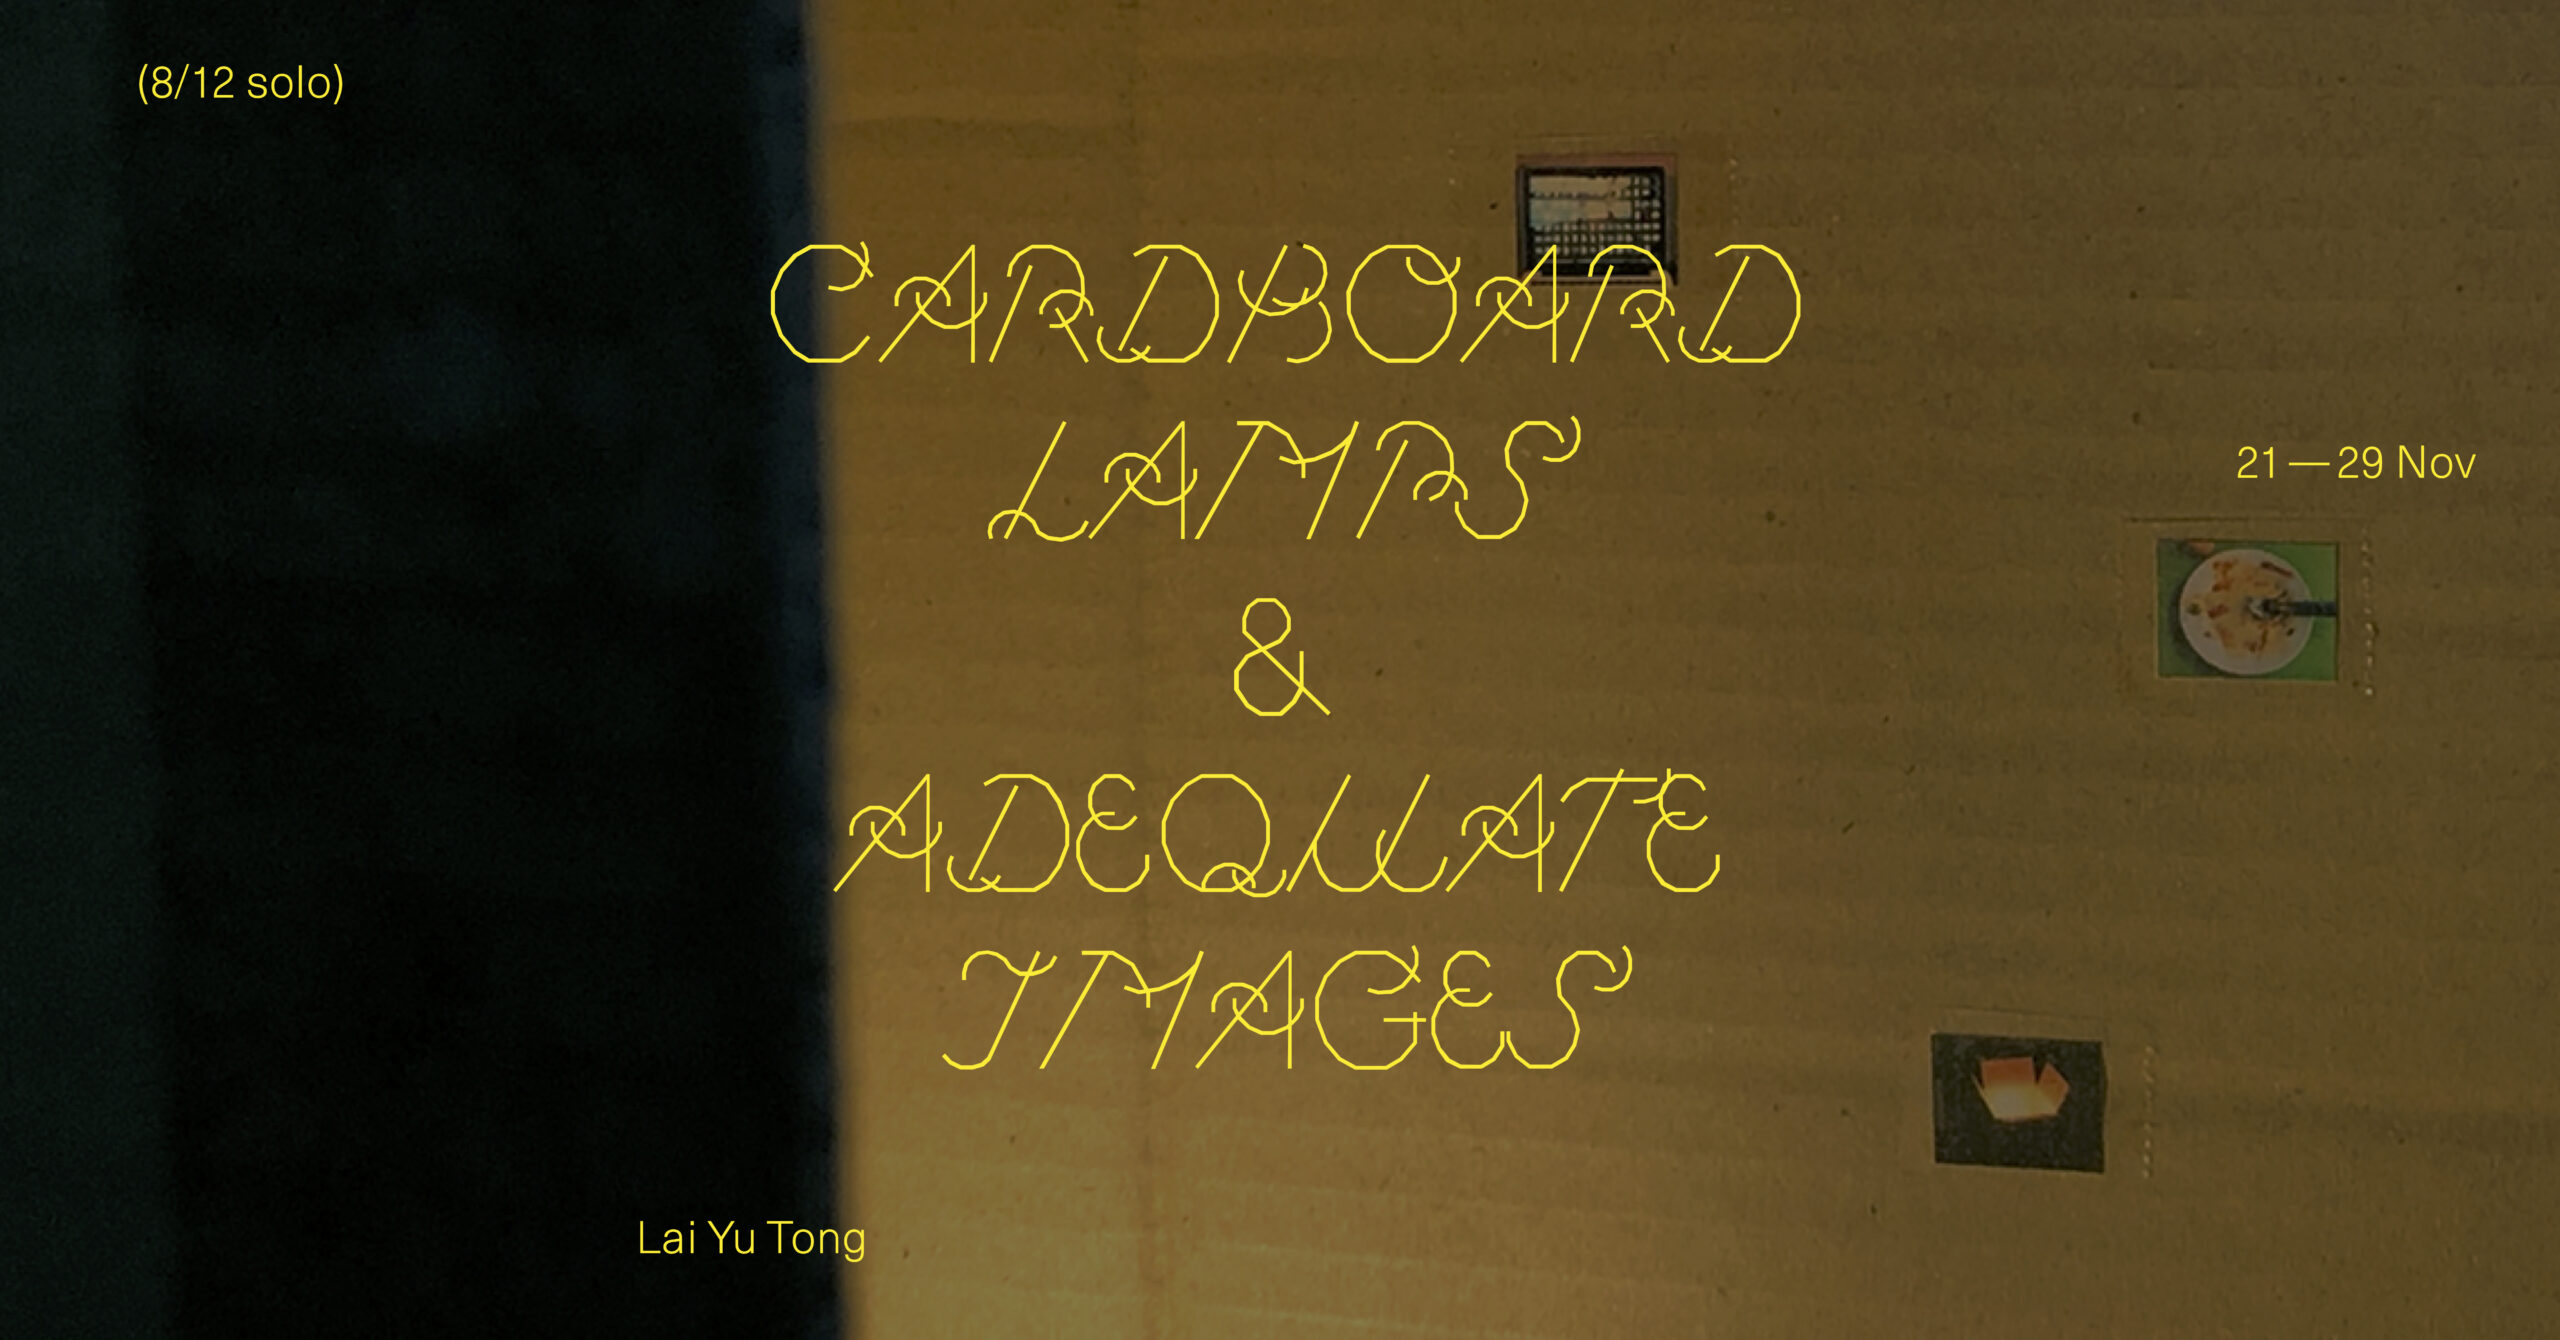 Cardboard Lamps & Adequate Images_title